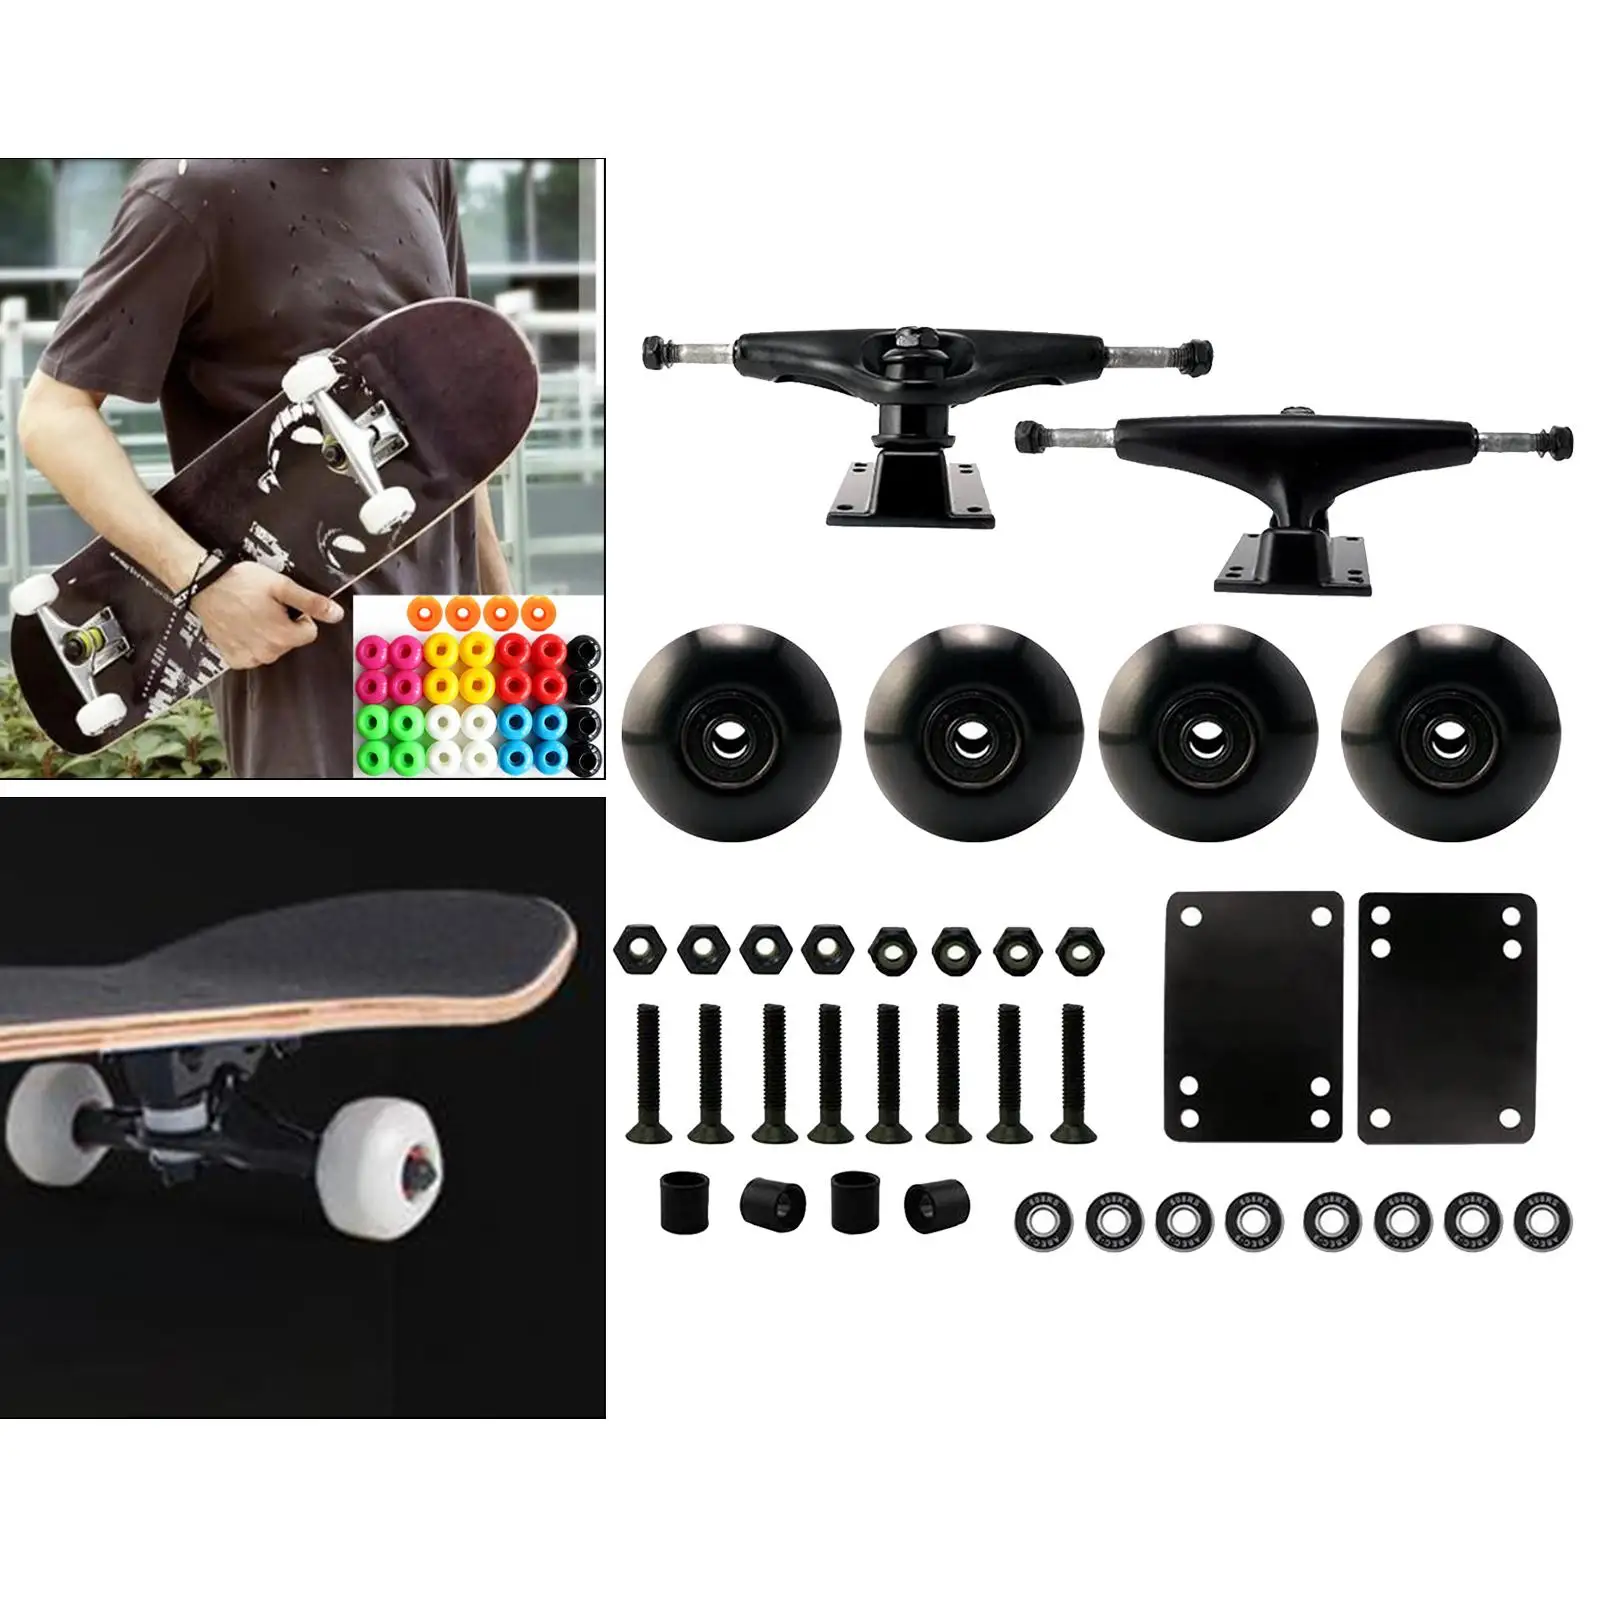 Skateboard Package 5 Inch Trucks with 52mm Wheels + Components, Bearings  with Nearly Every Skate Wheel